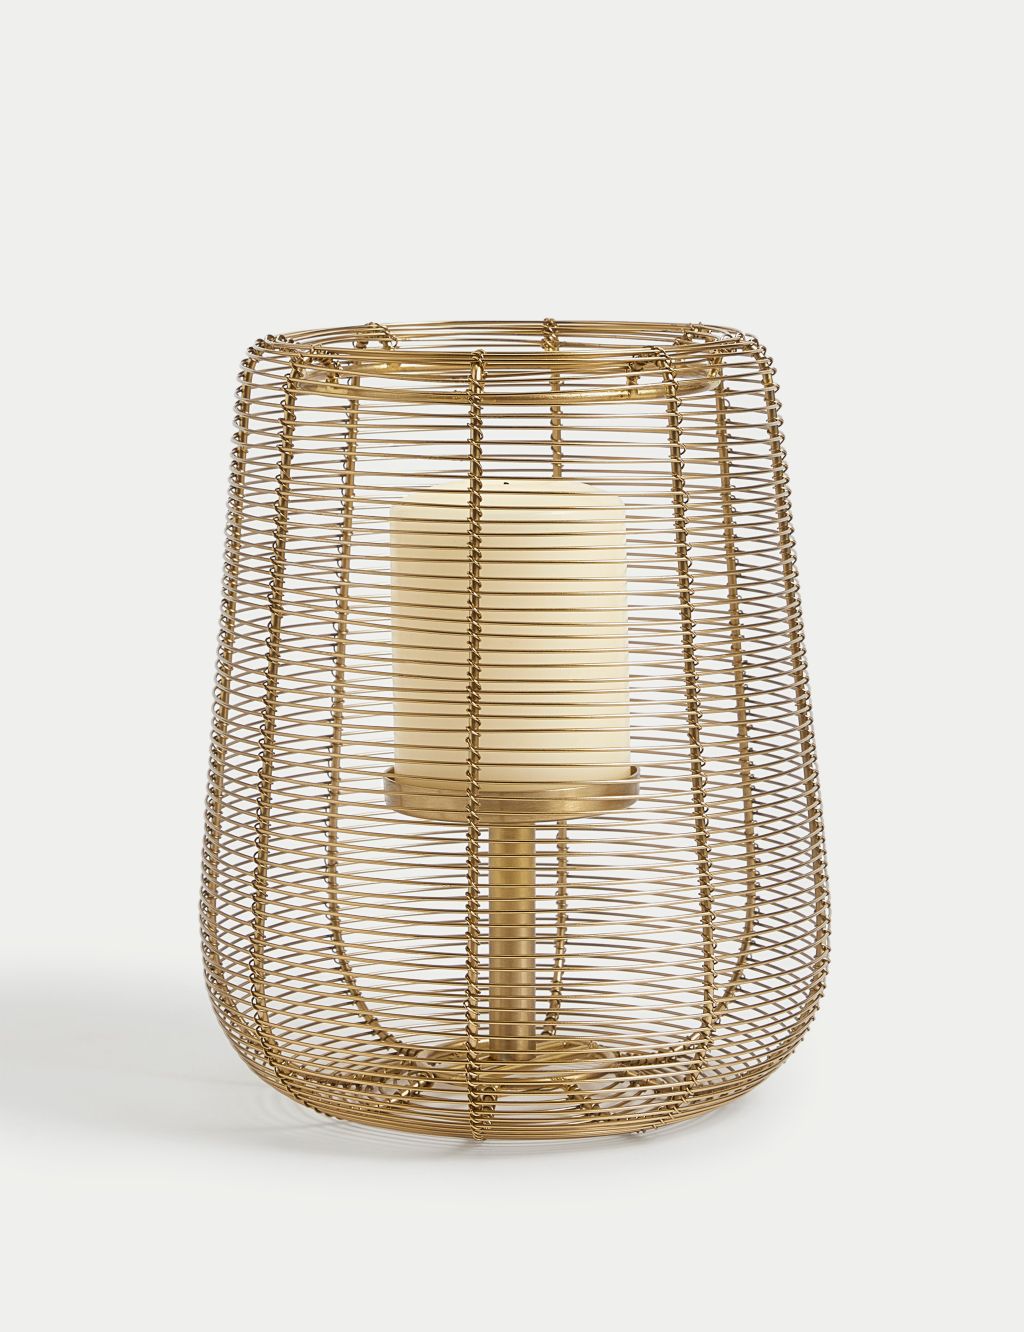 Hand Wrapped Wire Lantern